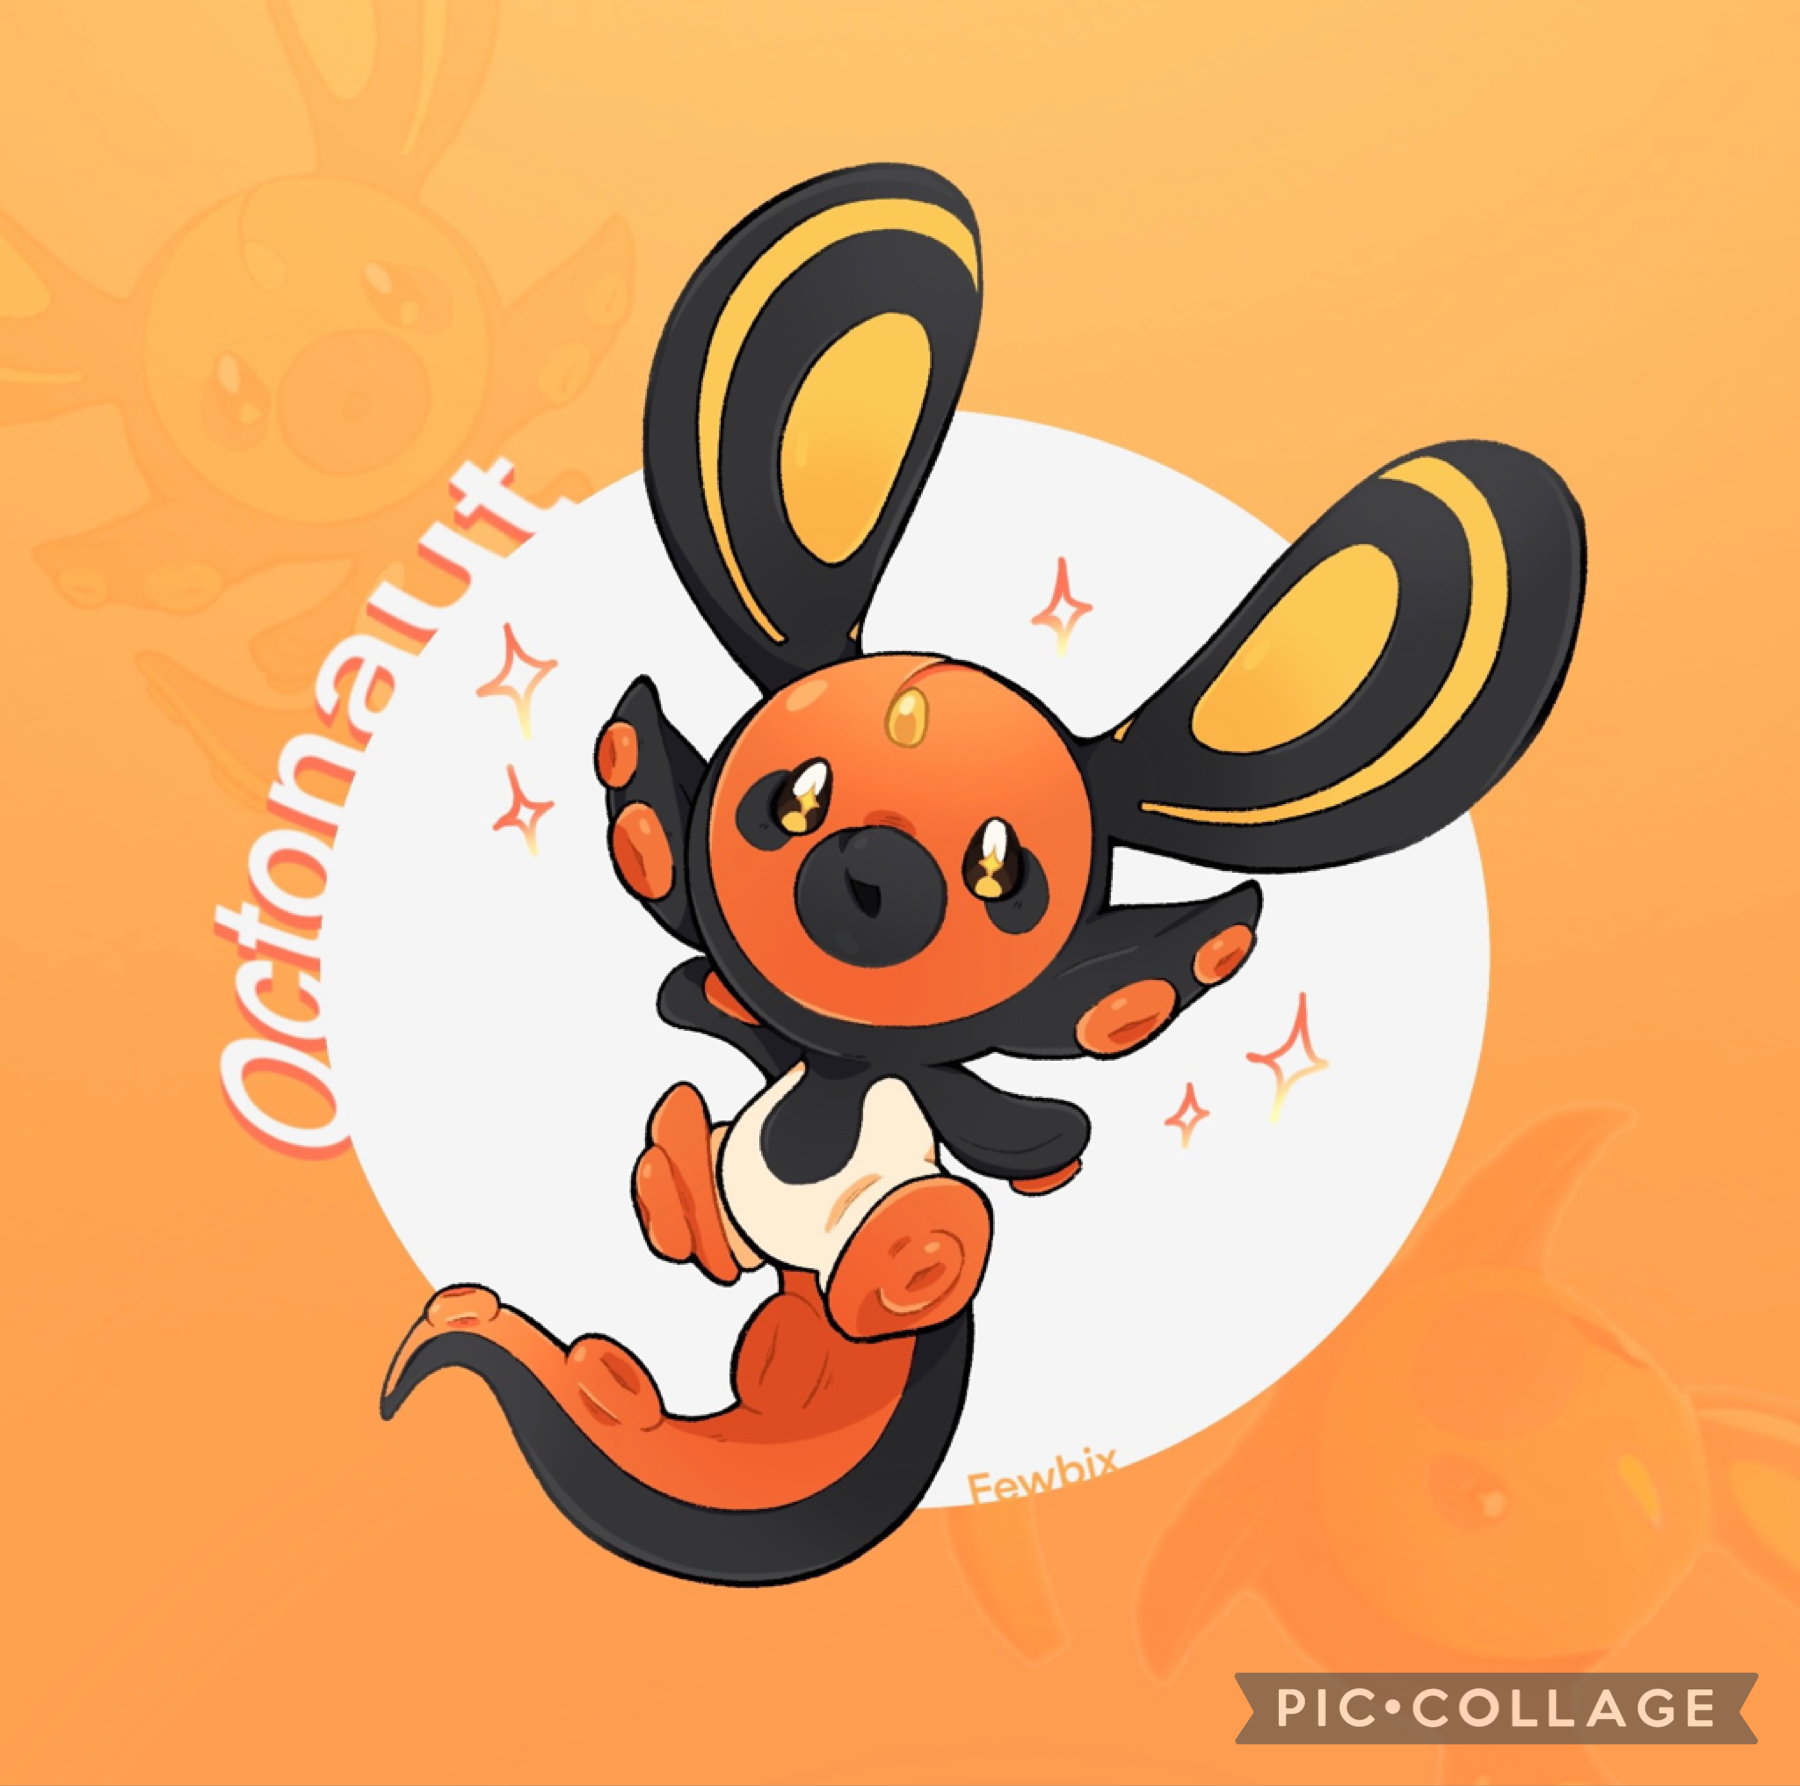 Made this adorable Pokémon inspired character from a generator! They’re literally friend shaped <3✨
-fewbixx